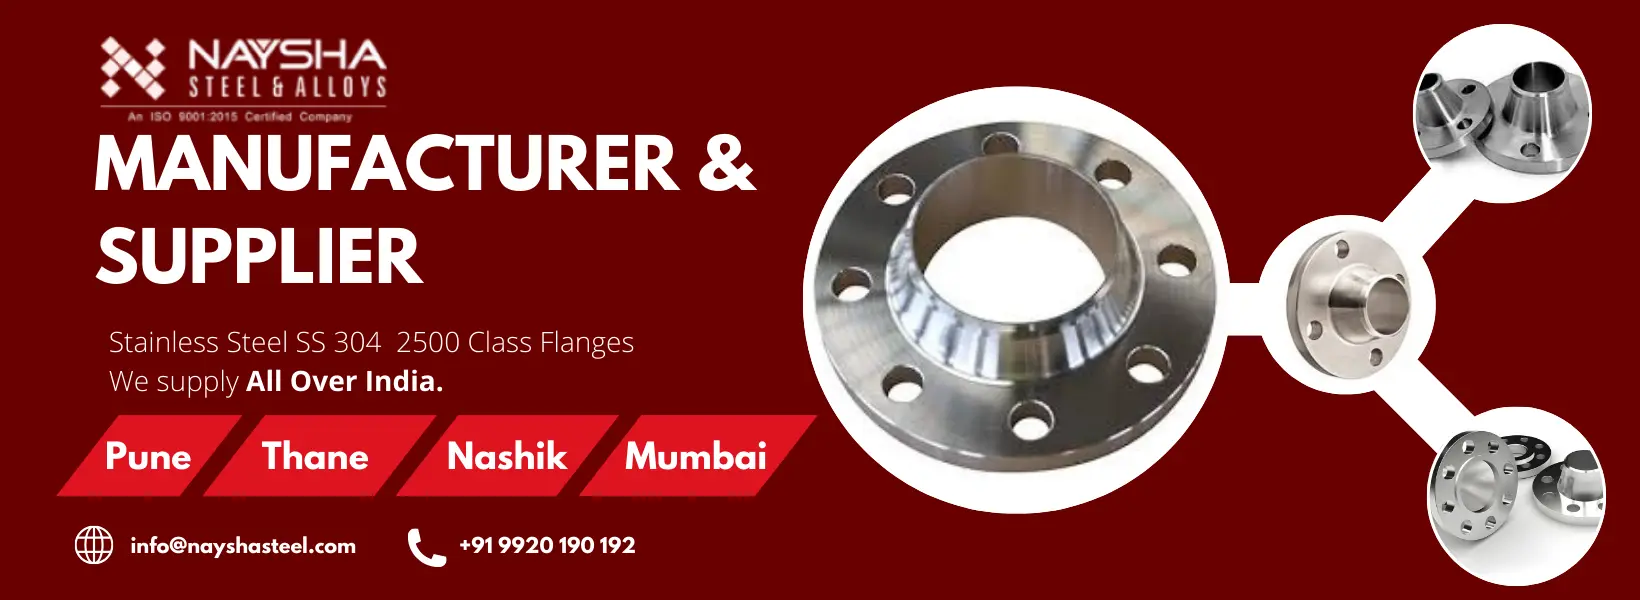 stainless steel 304 2500 class flanges banner